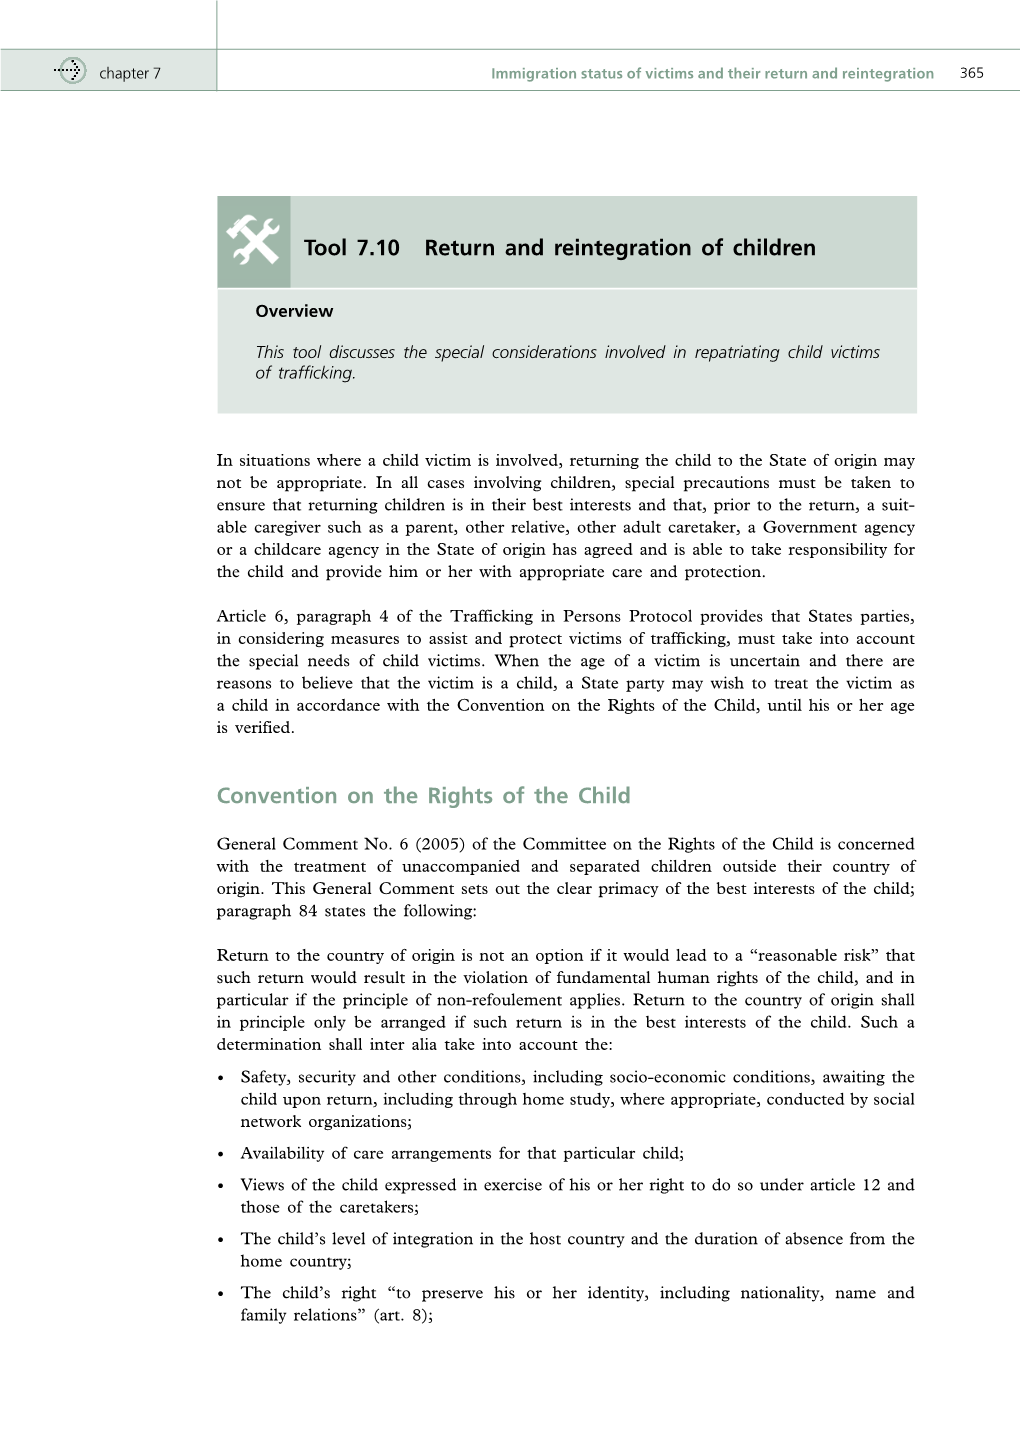 Tool 7.10 Return and Reintegration of Children Convention on the Rights